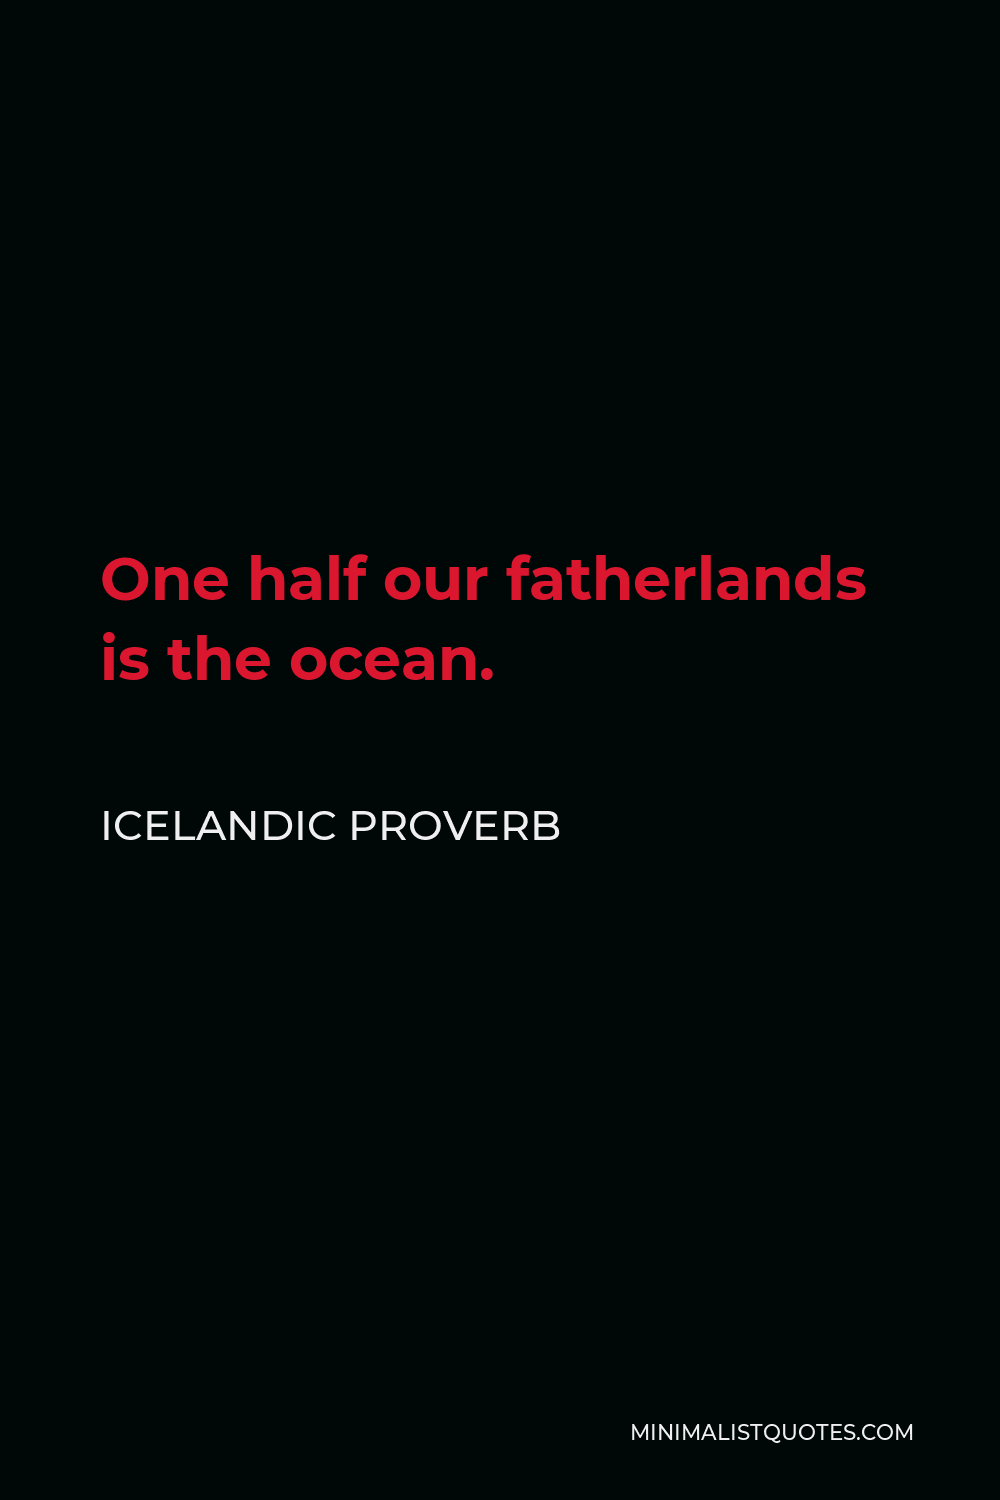 Icelandic Proverb Quote - One half our fatherlands is the ocean.